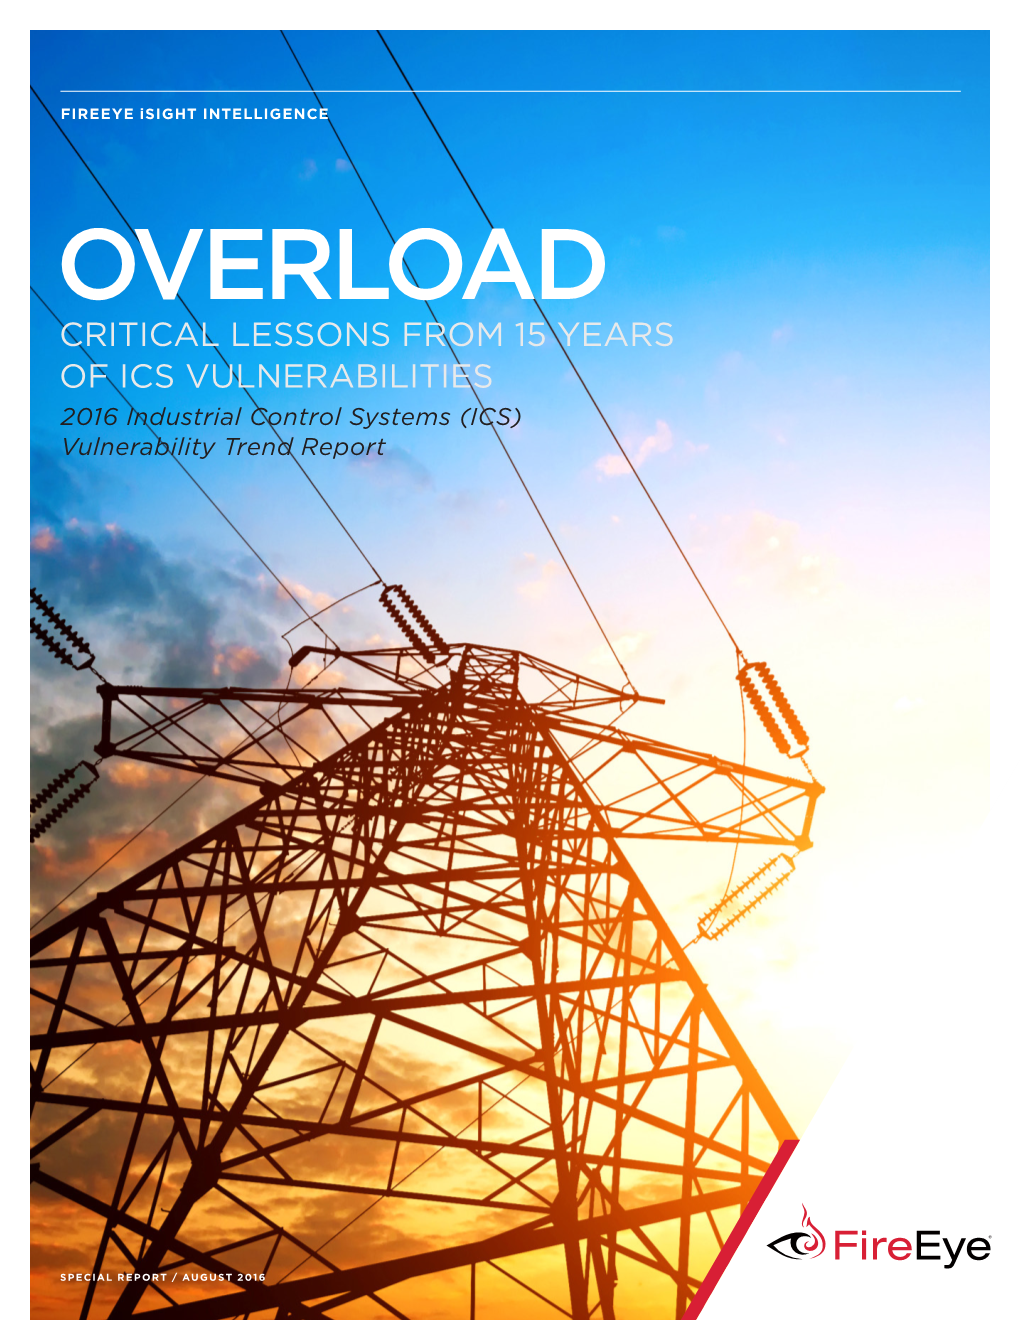 OVERLOAD CRITICAL LESSONS from 15 YEARS of ICS VULNERABILITIES 2016 Industrial Control Systems (ICS) Vulnerability Trend Report